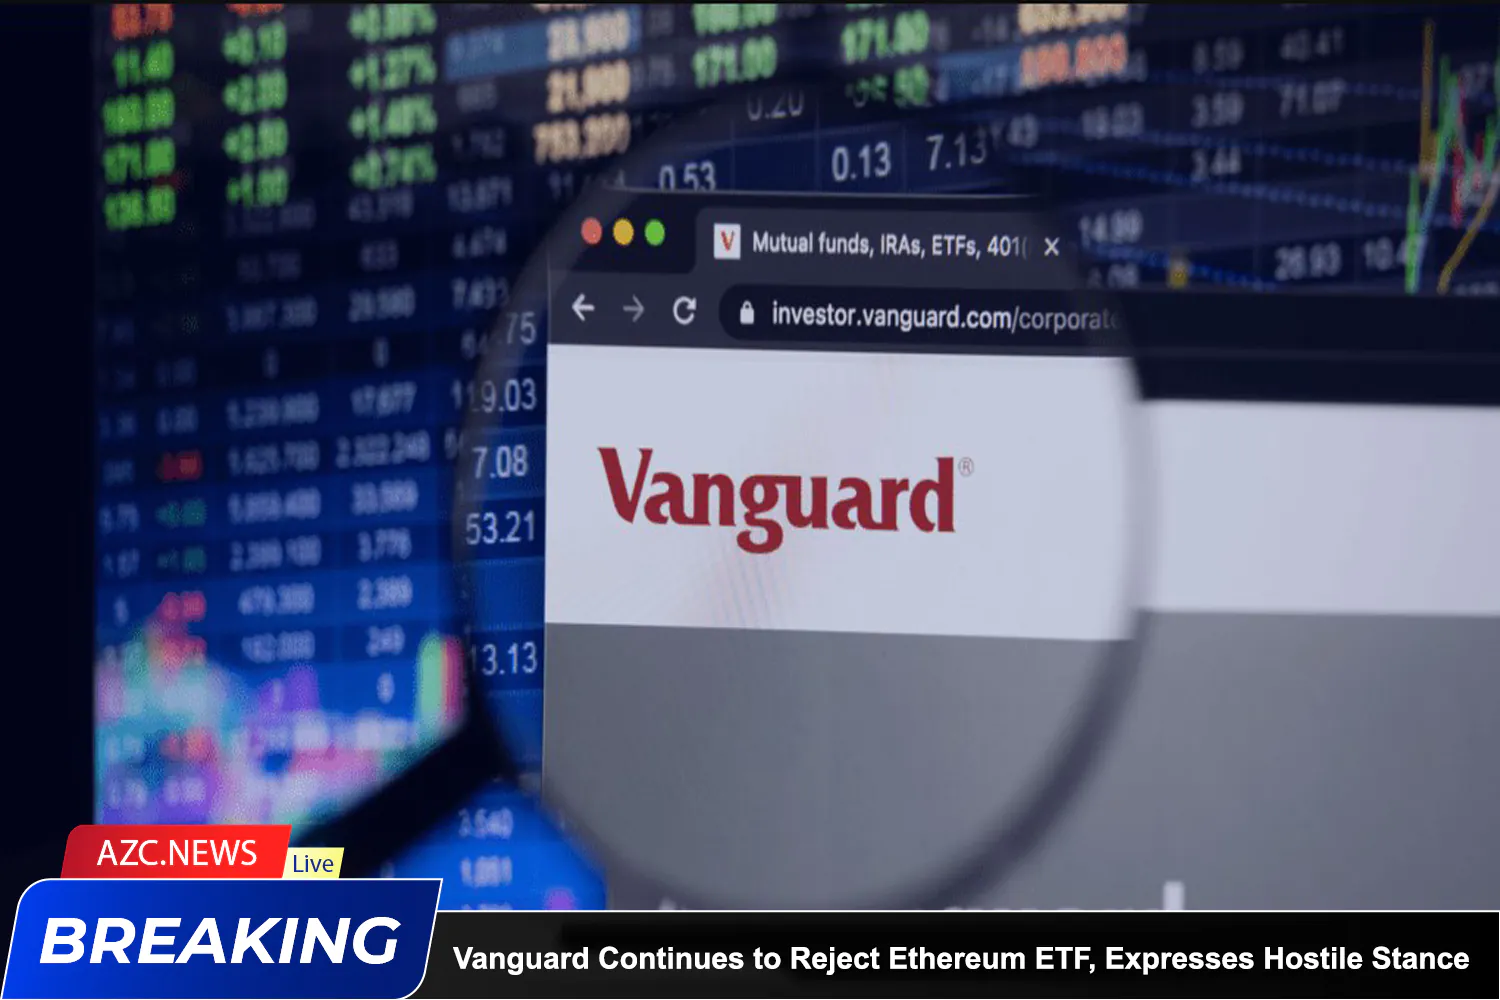 Azcnews Vanguard Continues To Reject Ethereum Etf, Expresses Hostile Stance